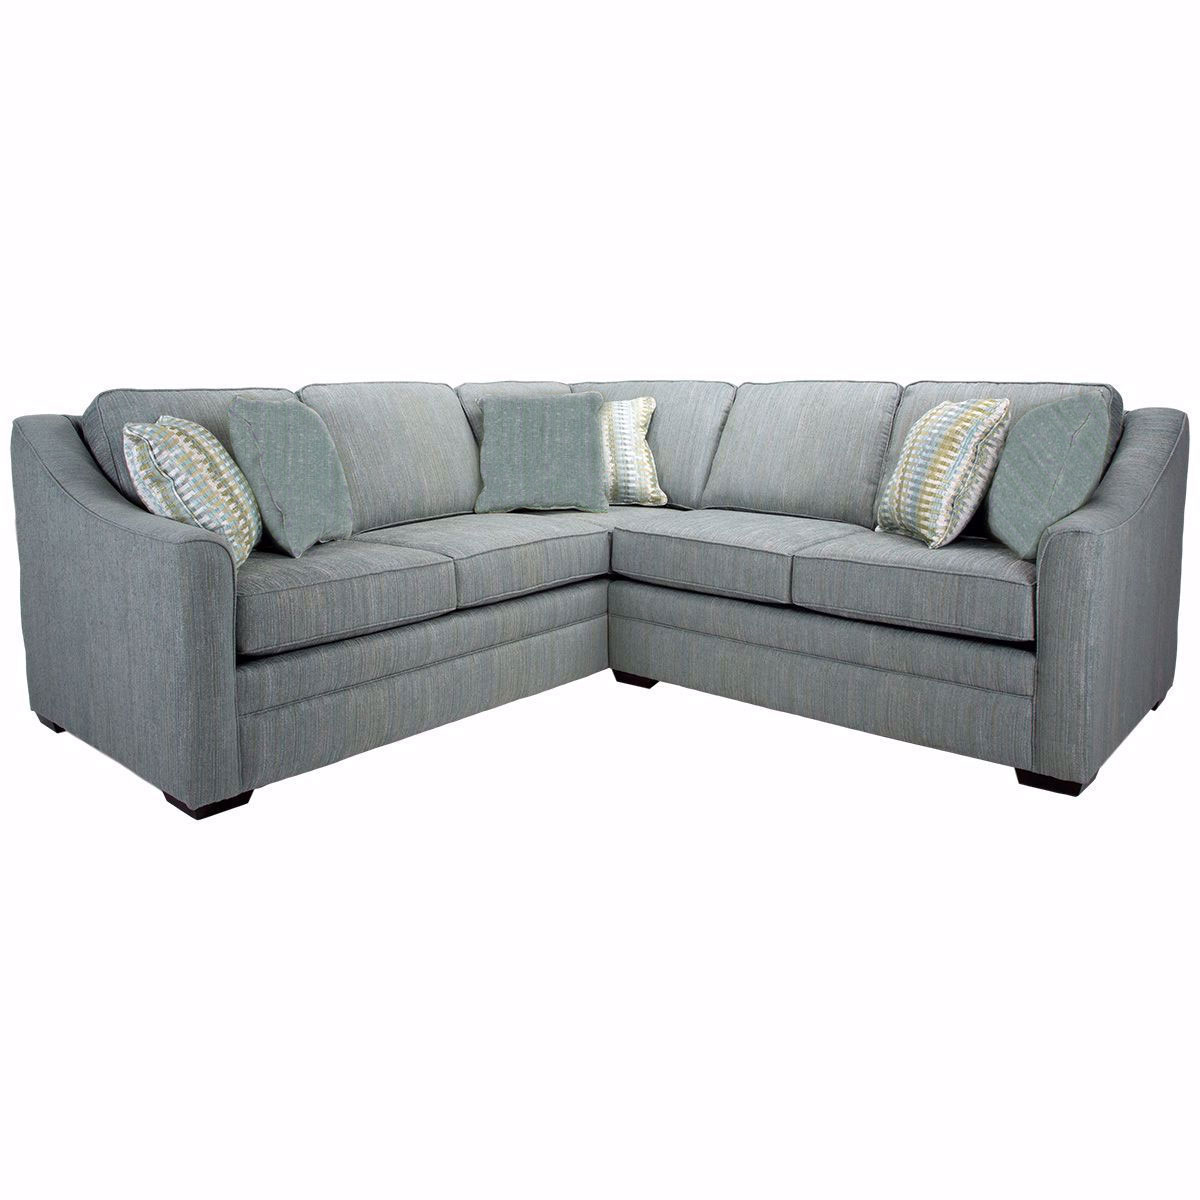 Picture of Thomas 2 Piece Sectional Sofa